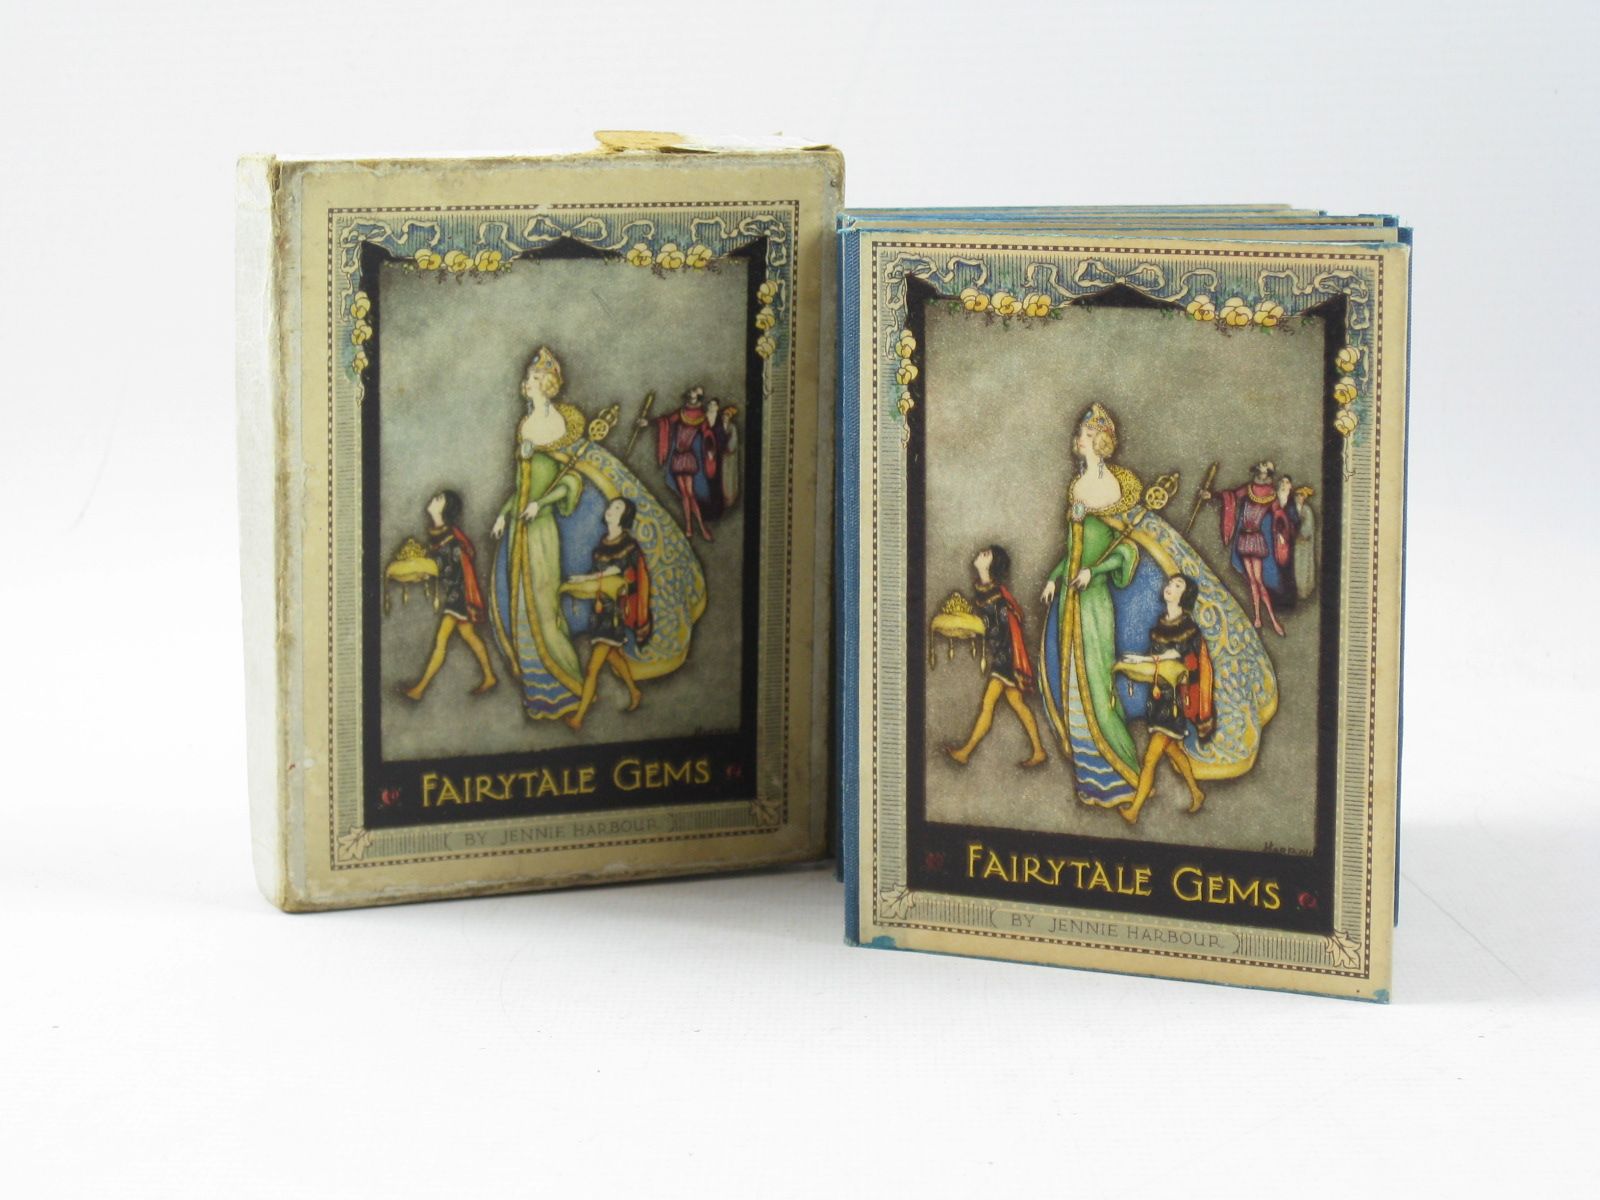 Photo of FAIRYTALE GEMS written by Hart, Hilda illustrated by Harbour, Jennie published by Raphael Tuck &amp; Sons Ltd. (STOCK CODE: 1314233)  for sale by Stella & Rose's Books